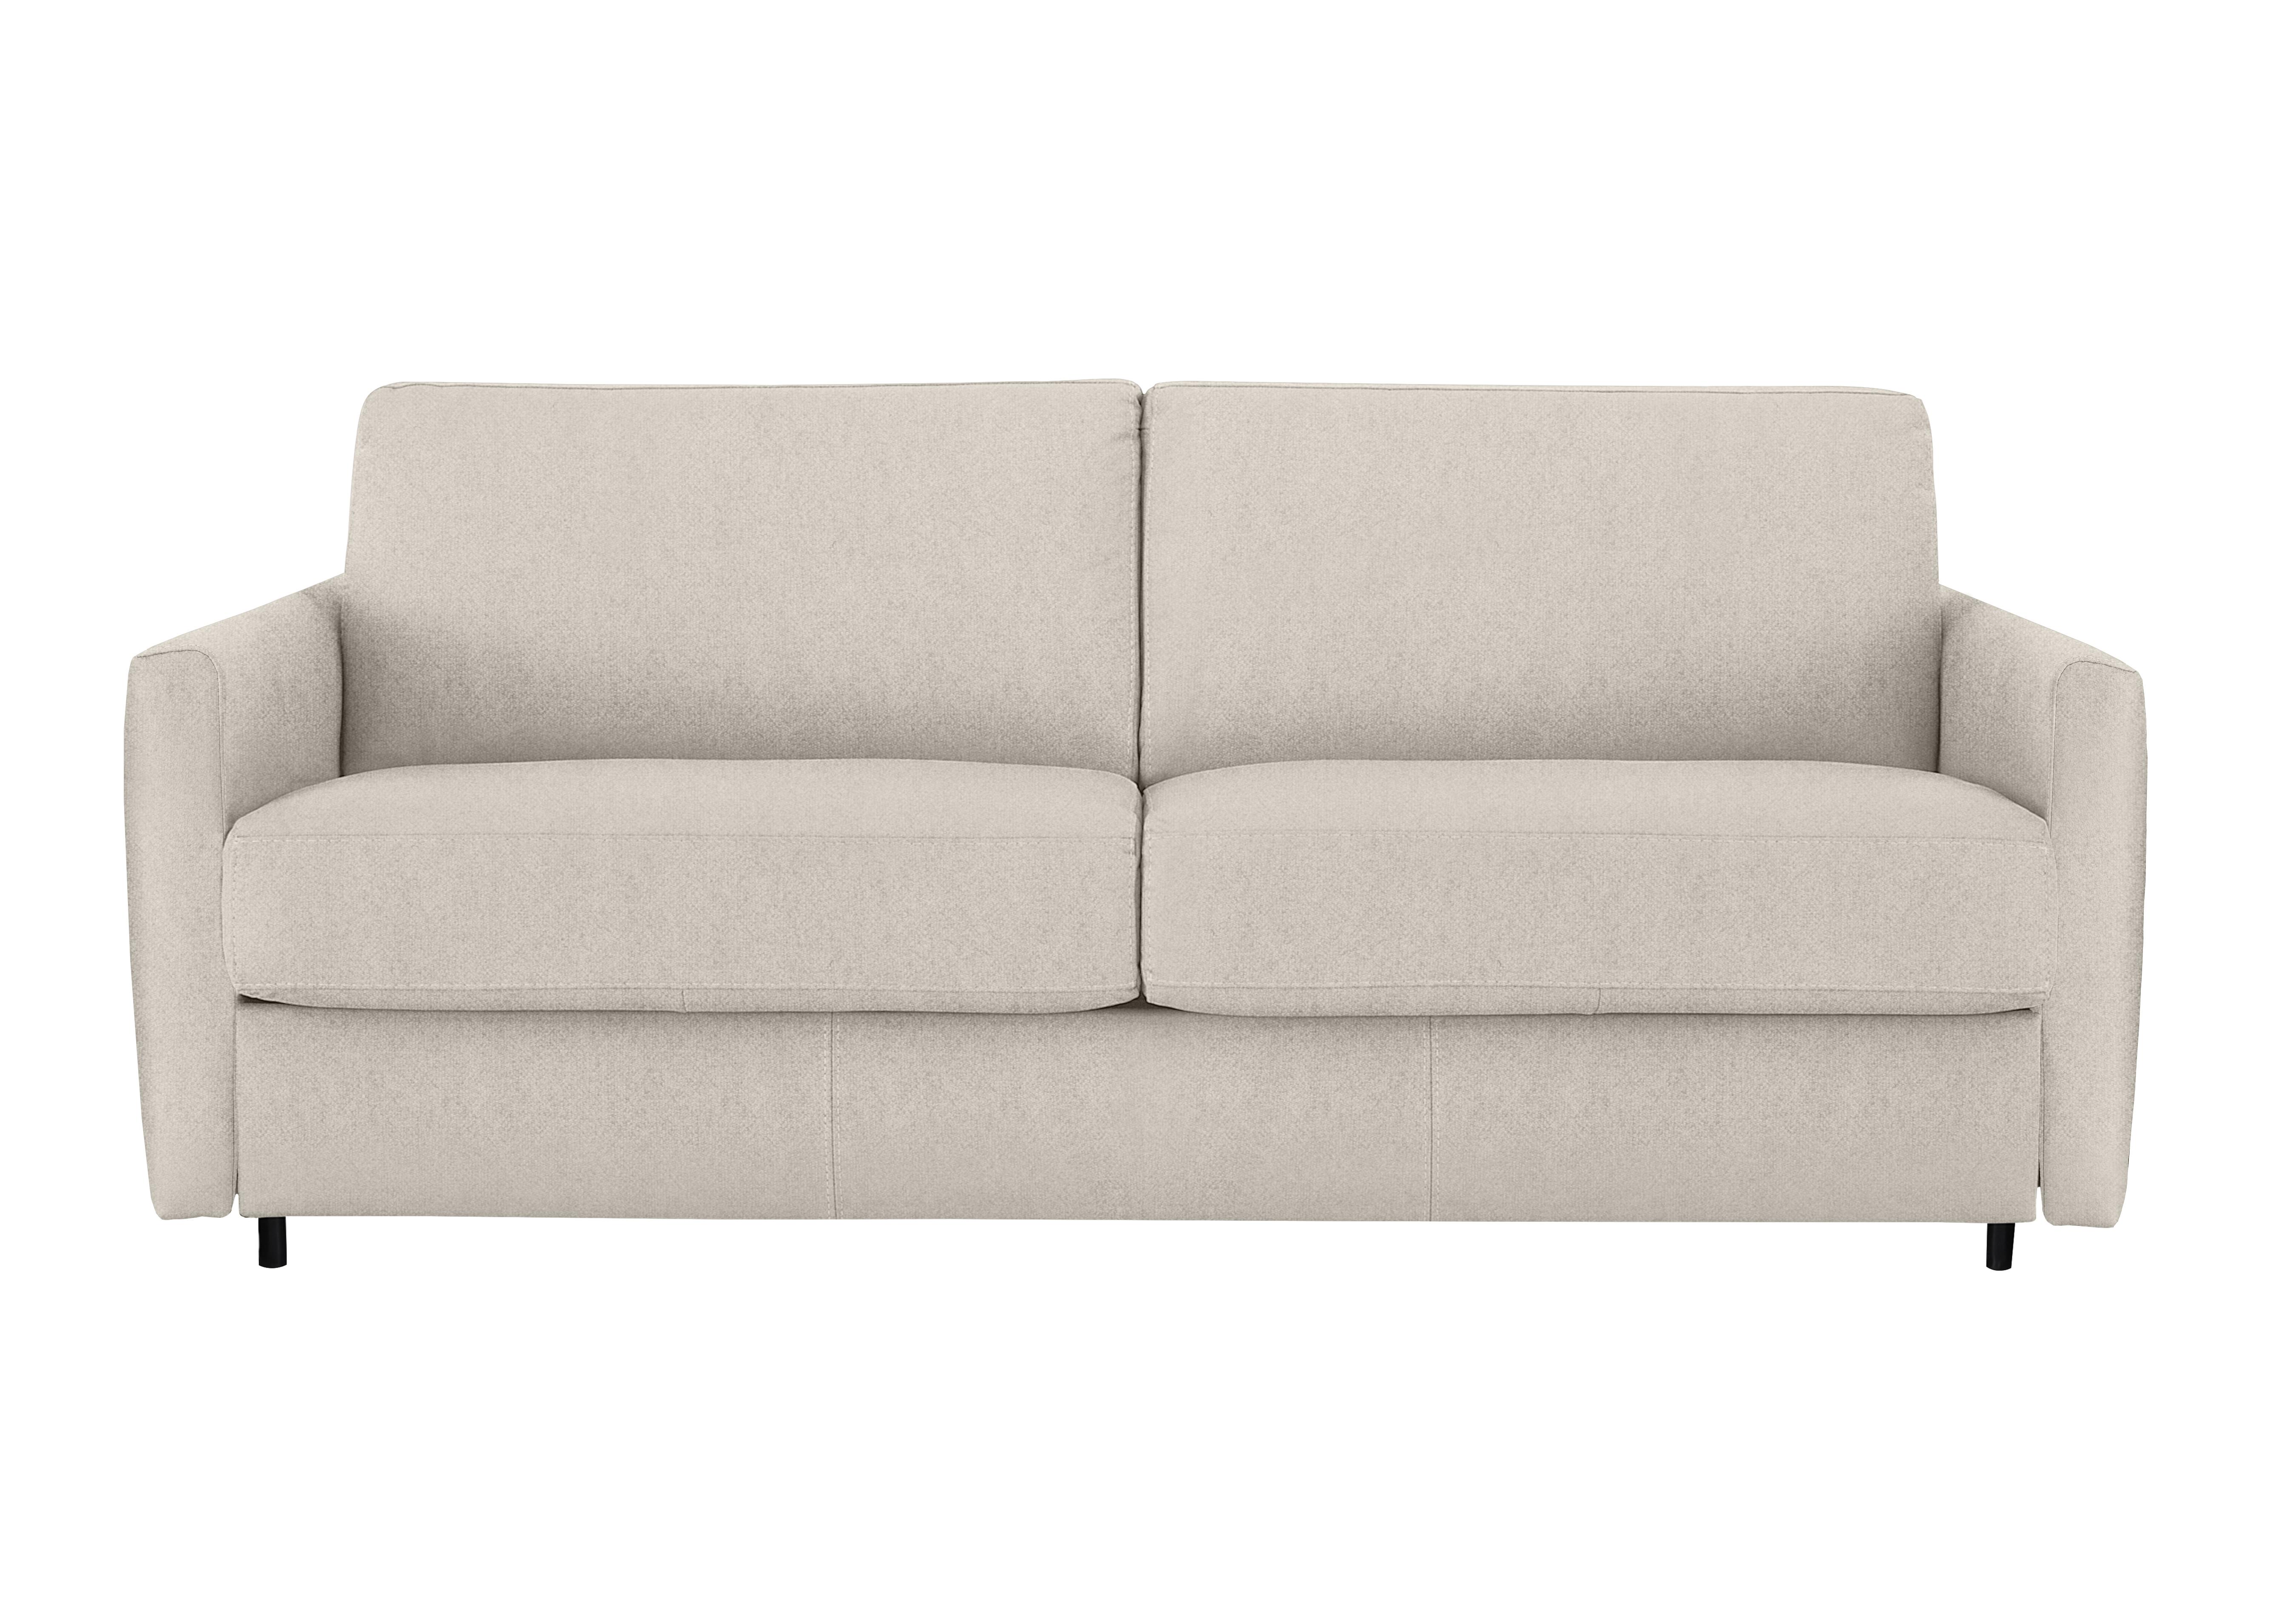 Alcova 3 Seater Fabric Sofa Bed with Slim Arms in Fuente Beige on Furniture Village